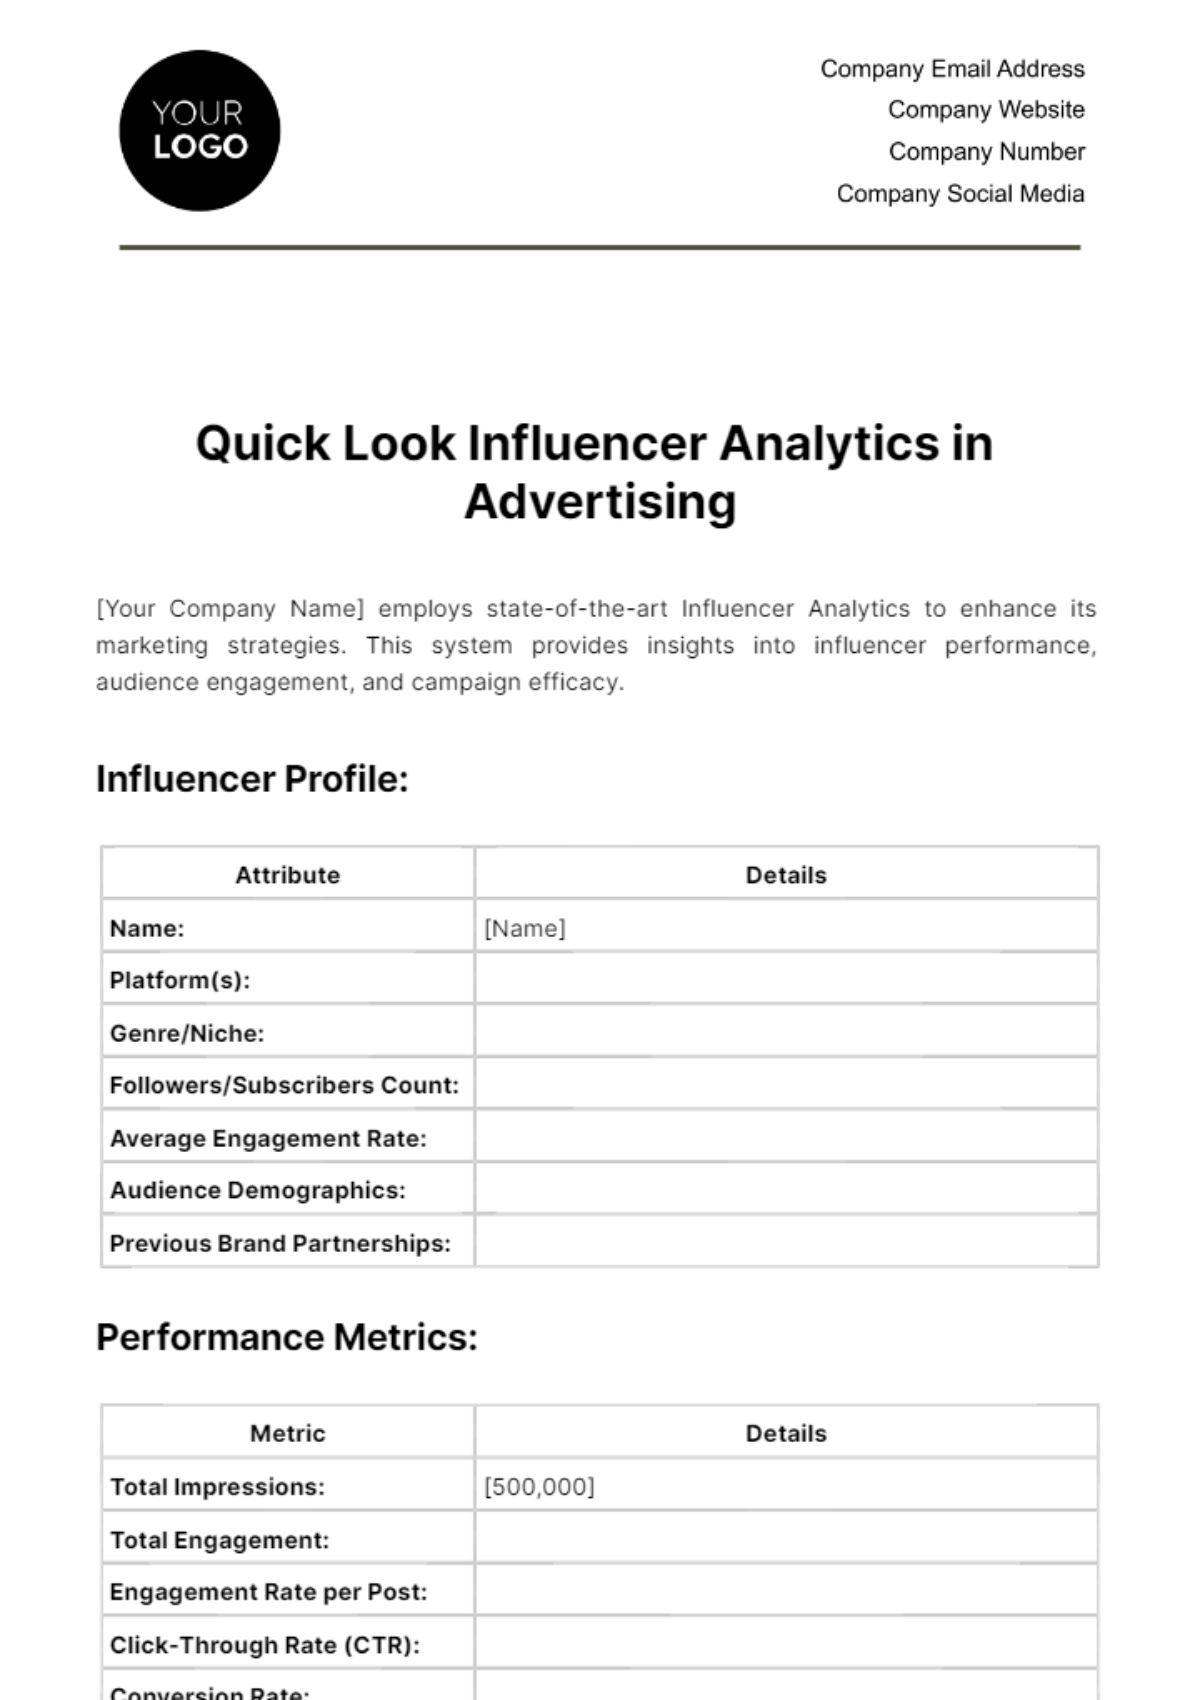 Free Quick Look Influencer Analytics in Advertising Template